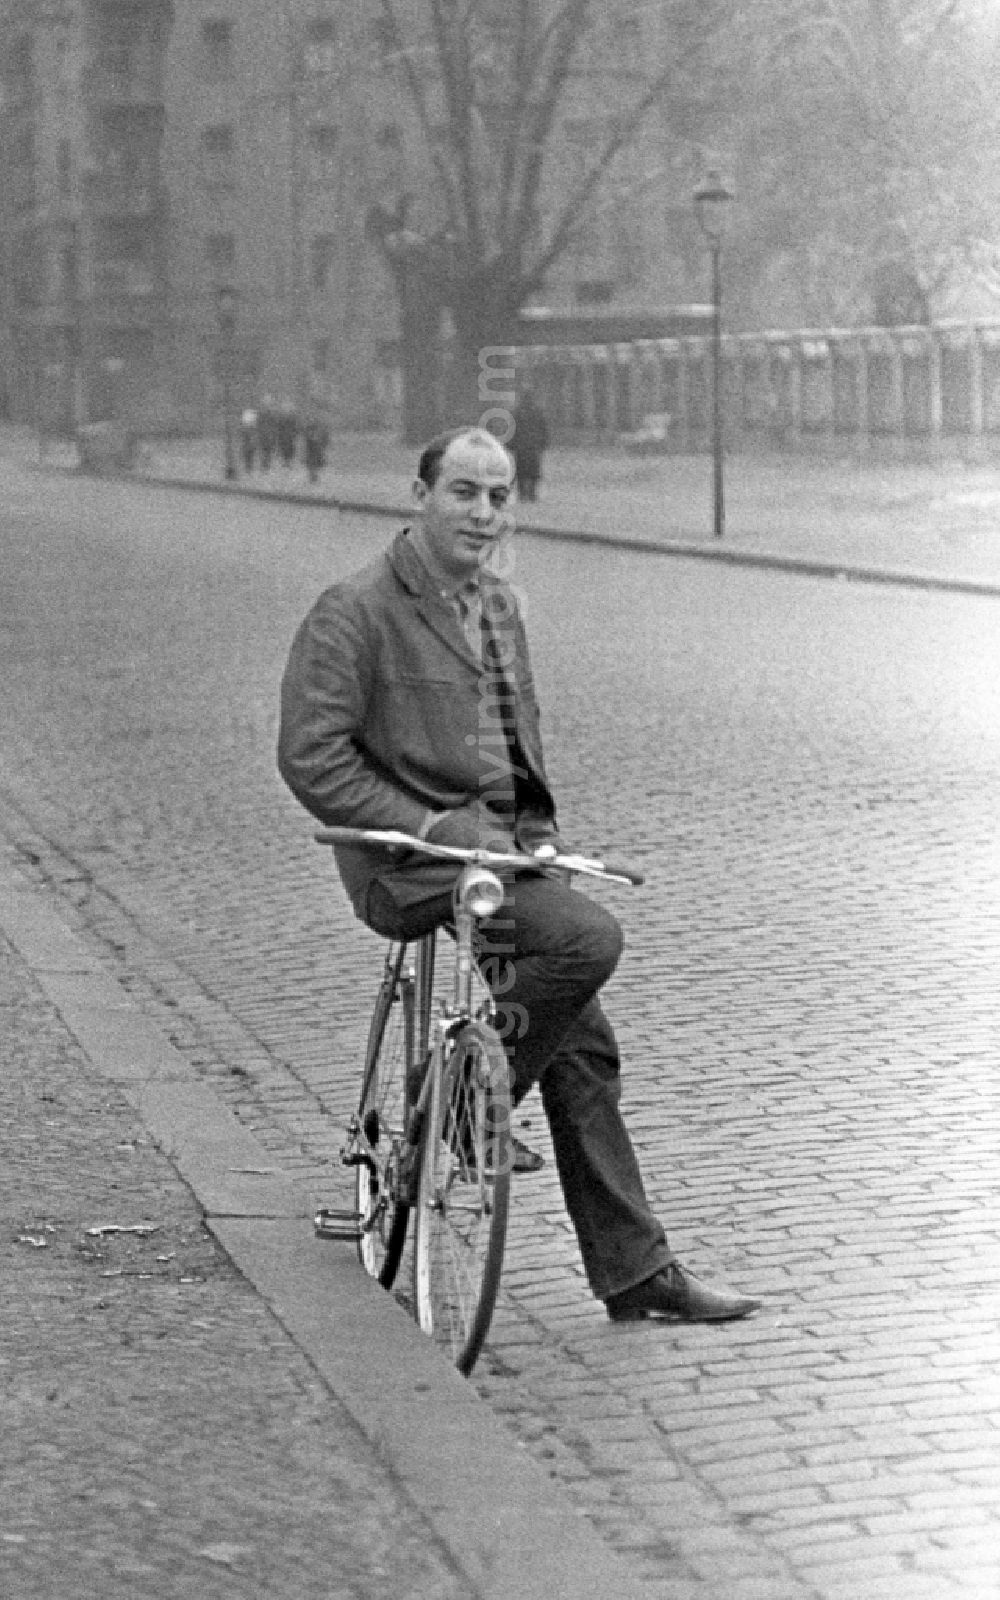 GDR picture archive: Berlin - Actor - portrait Manfred Krug in the district Mitte in Berlin, the former capital of the GDR, German Democratic Republic